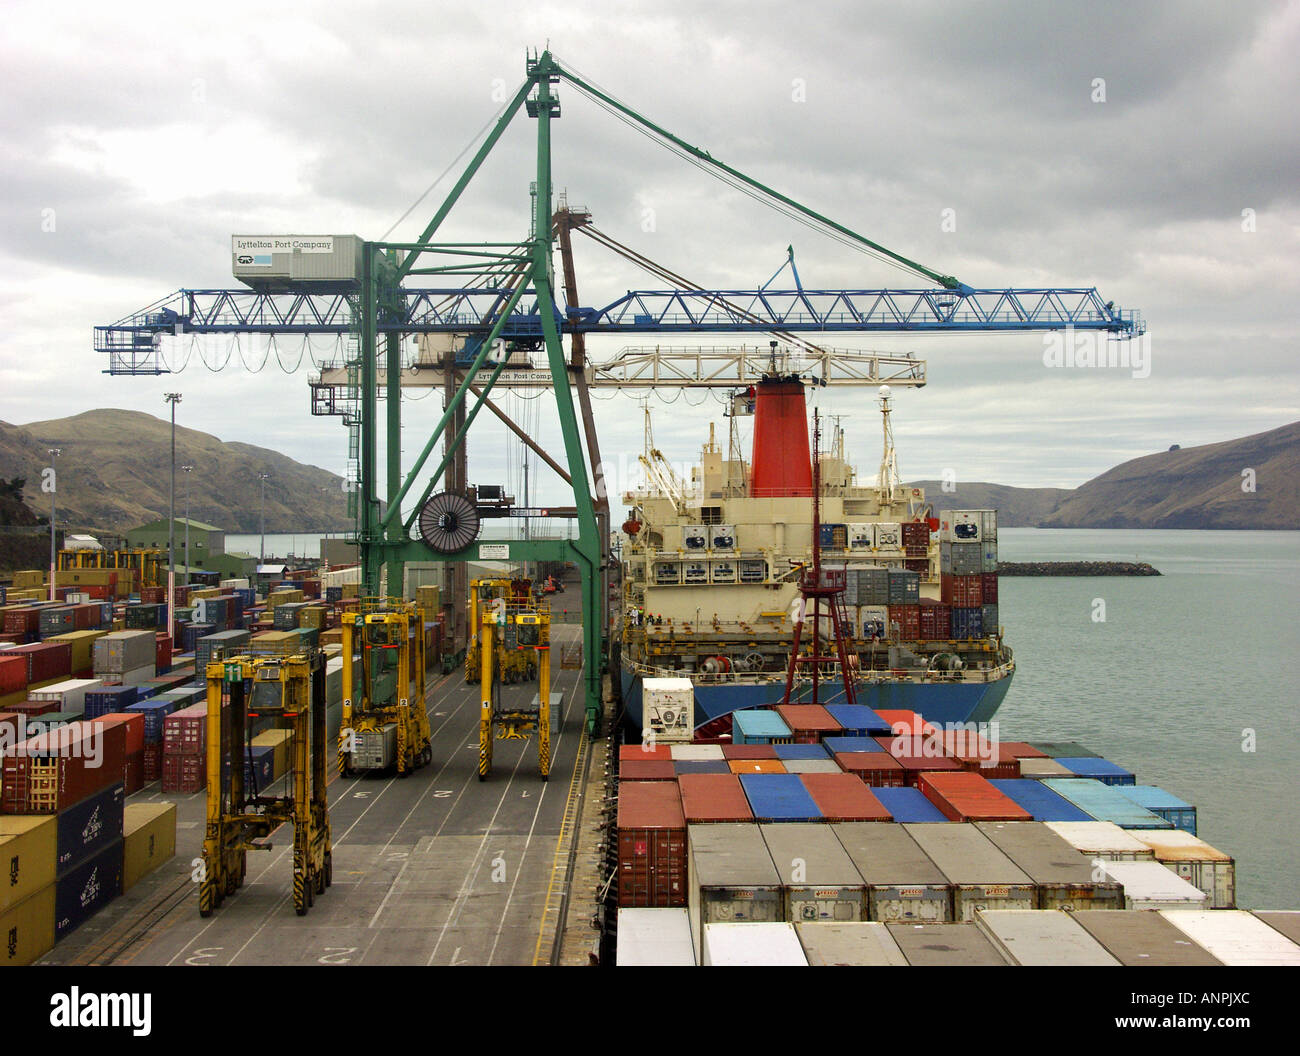 View from bridge of a container ship berthed at Lyttelton New Zealand Stock Photo